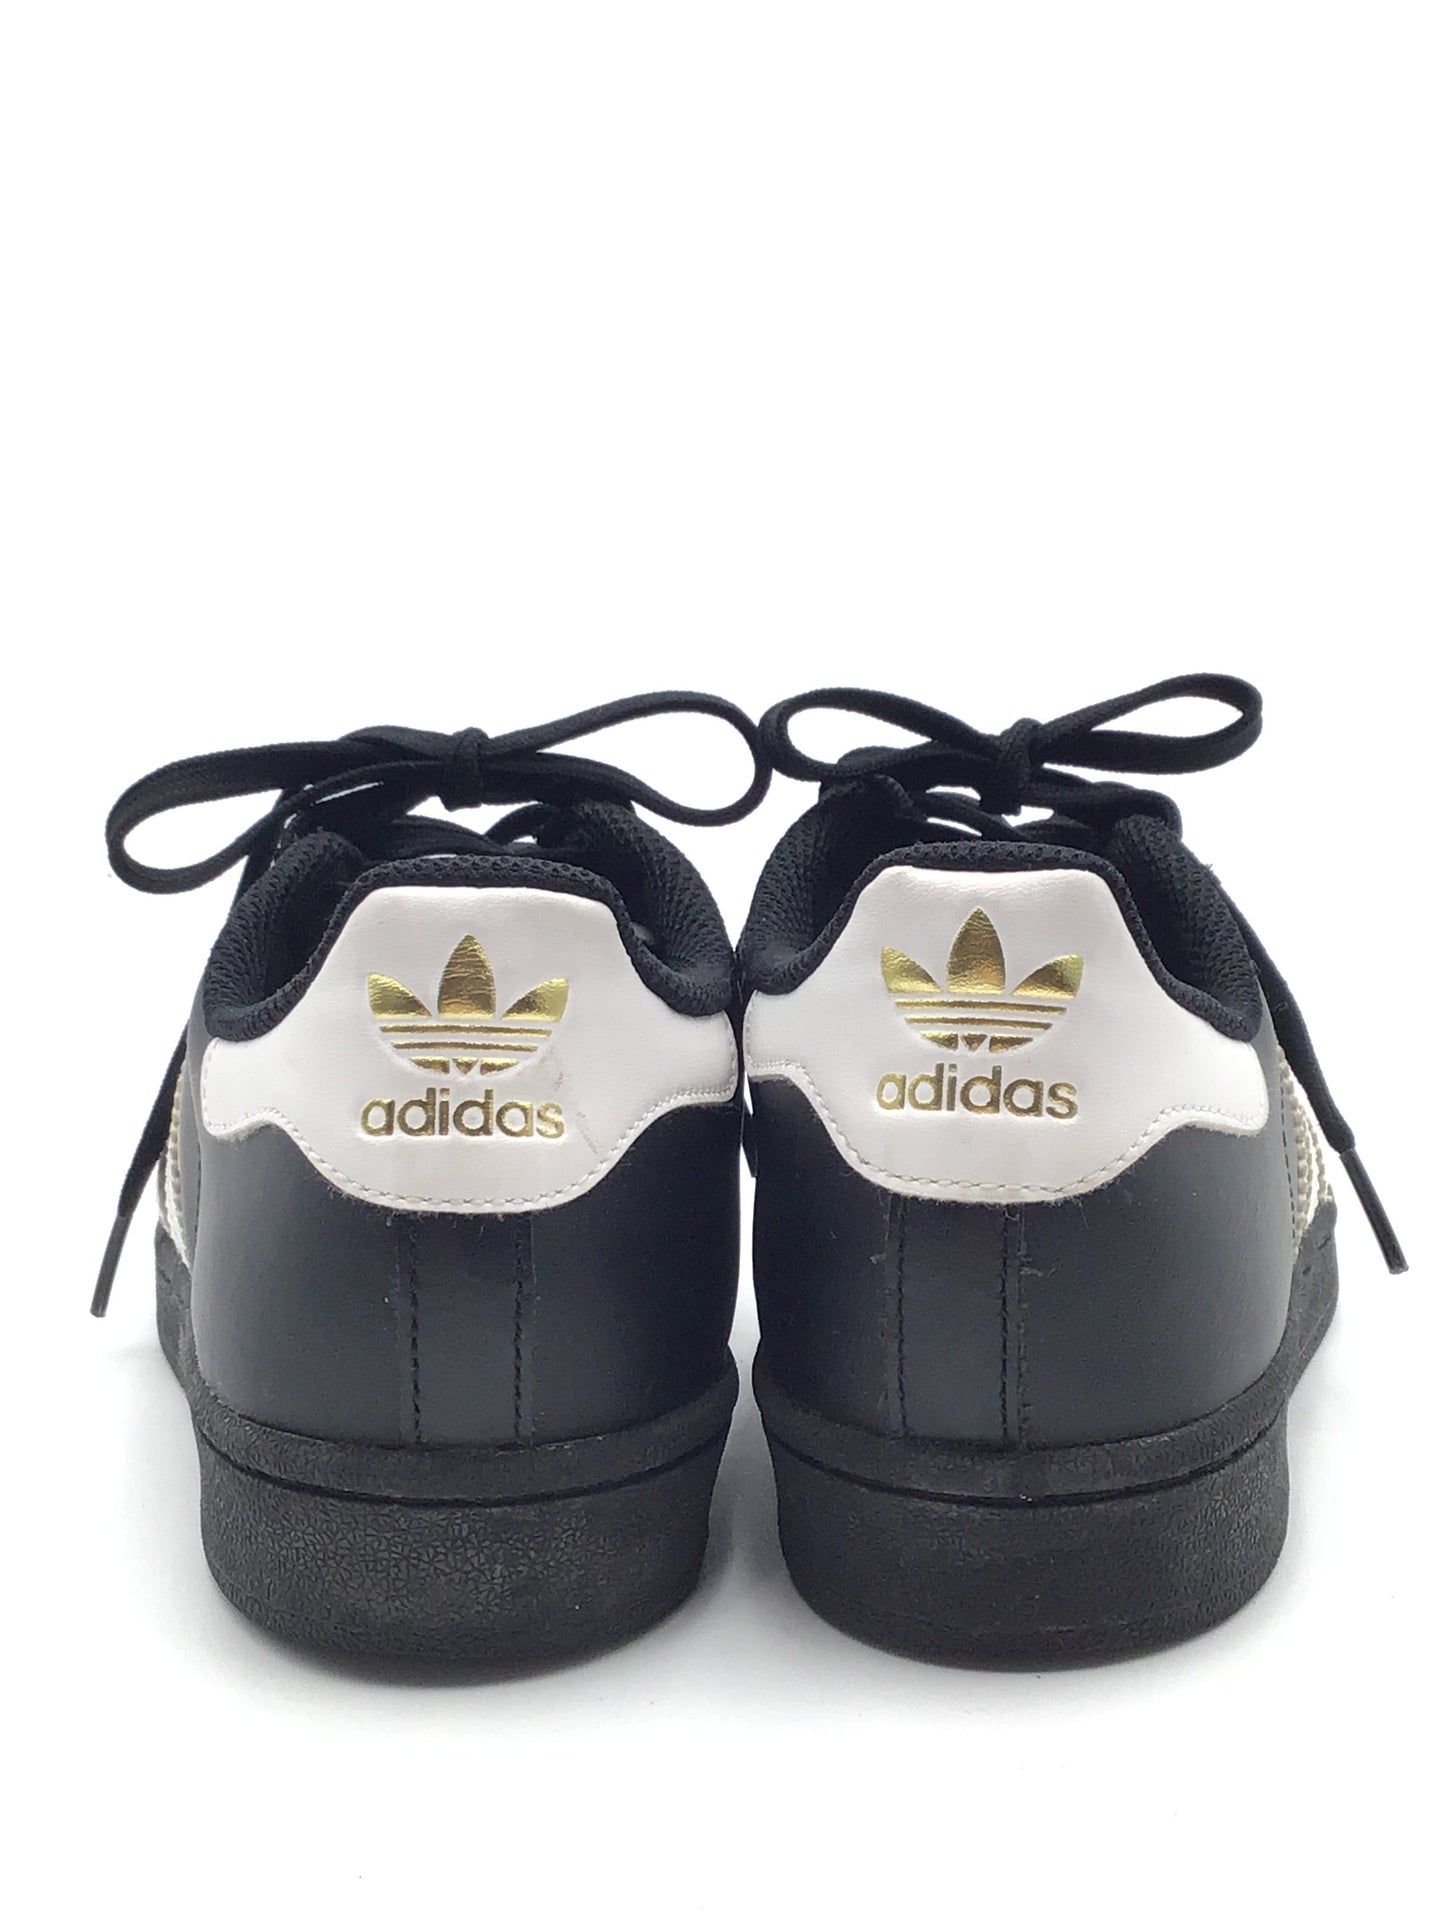 Black & Gold Shoes Sneakers Adidas, Size 5.5